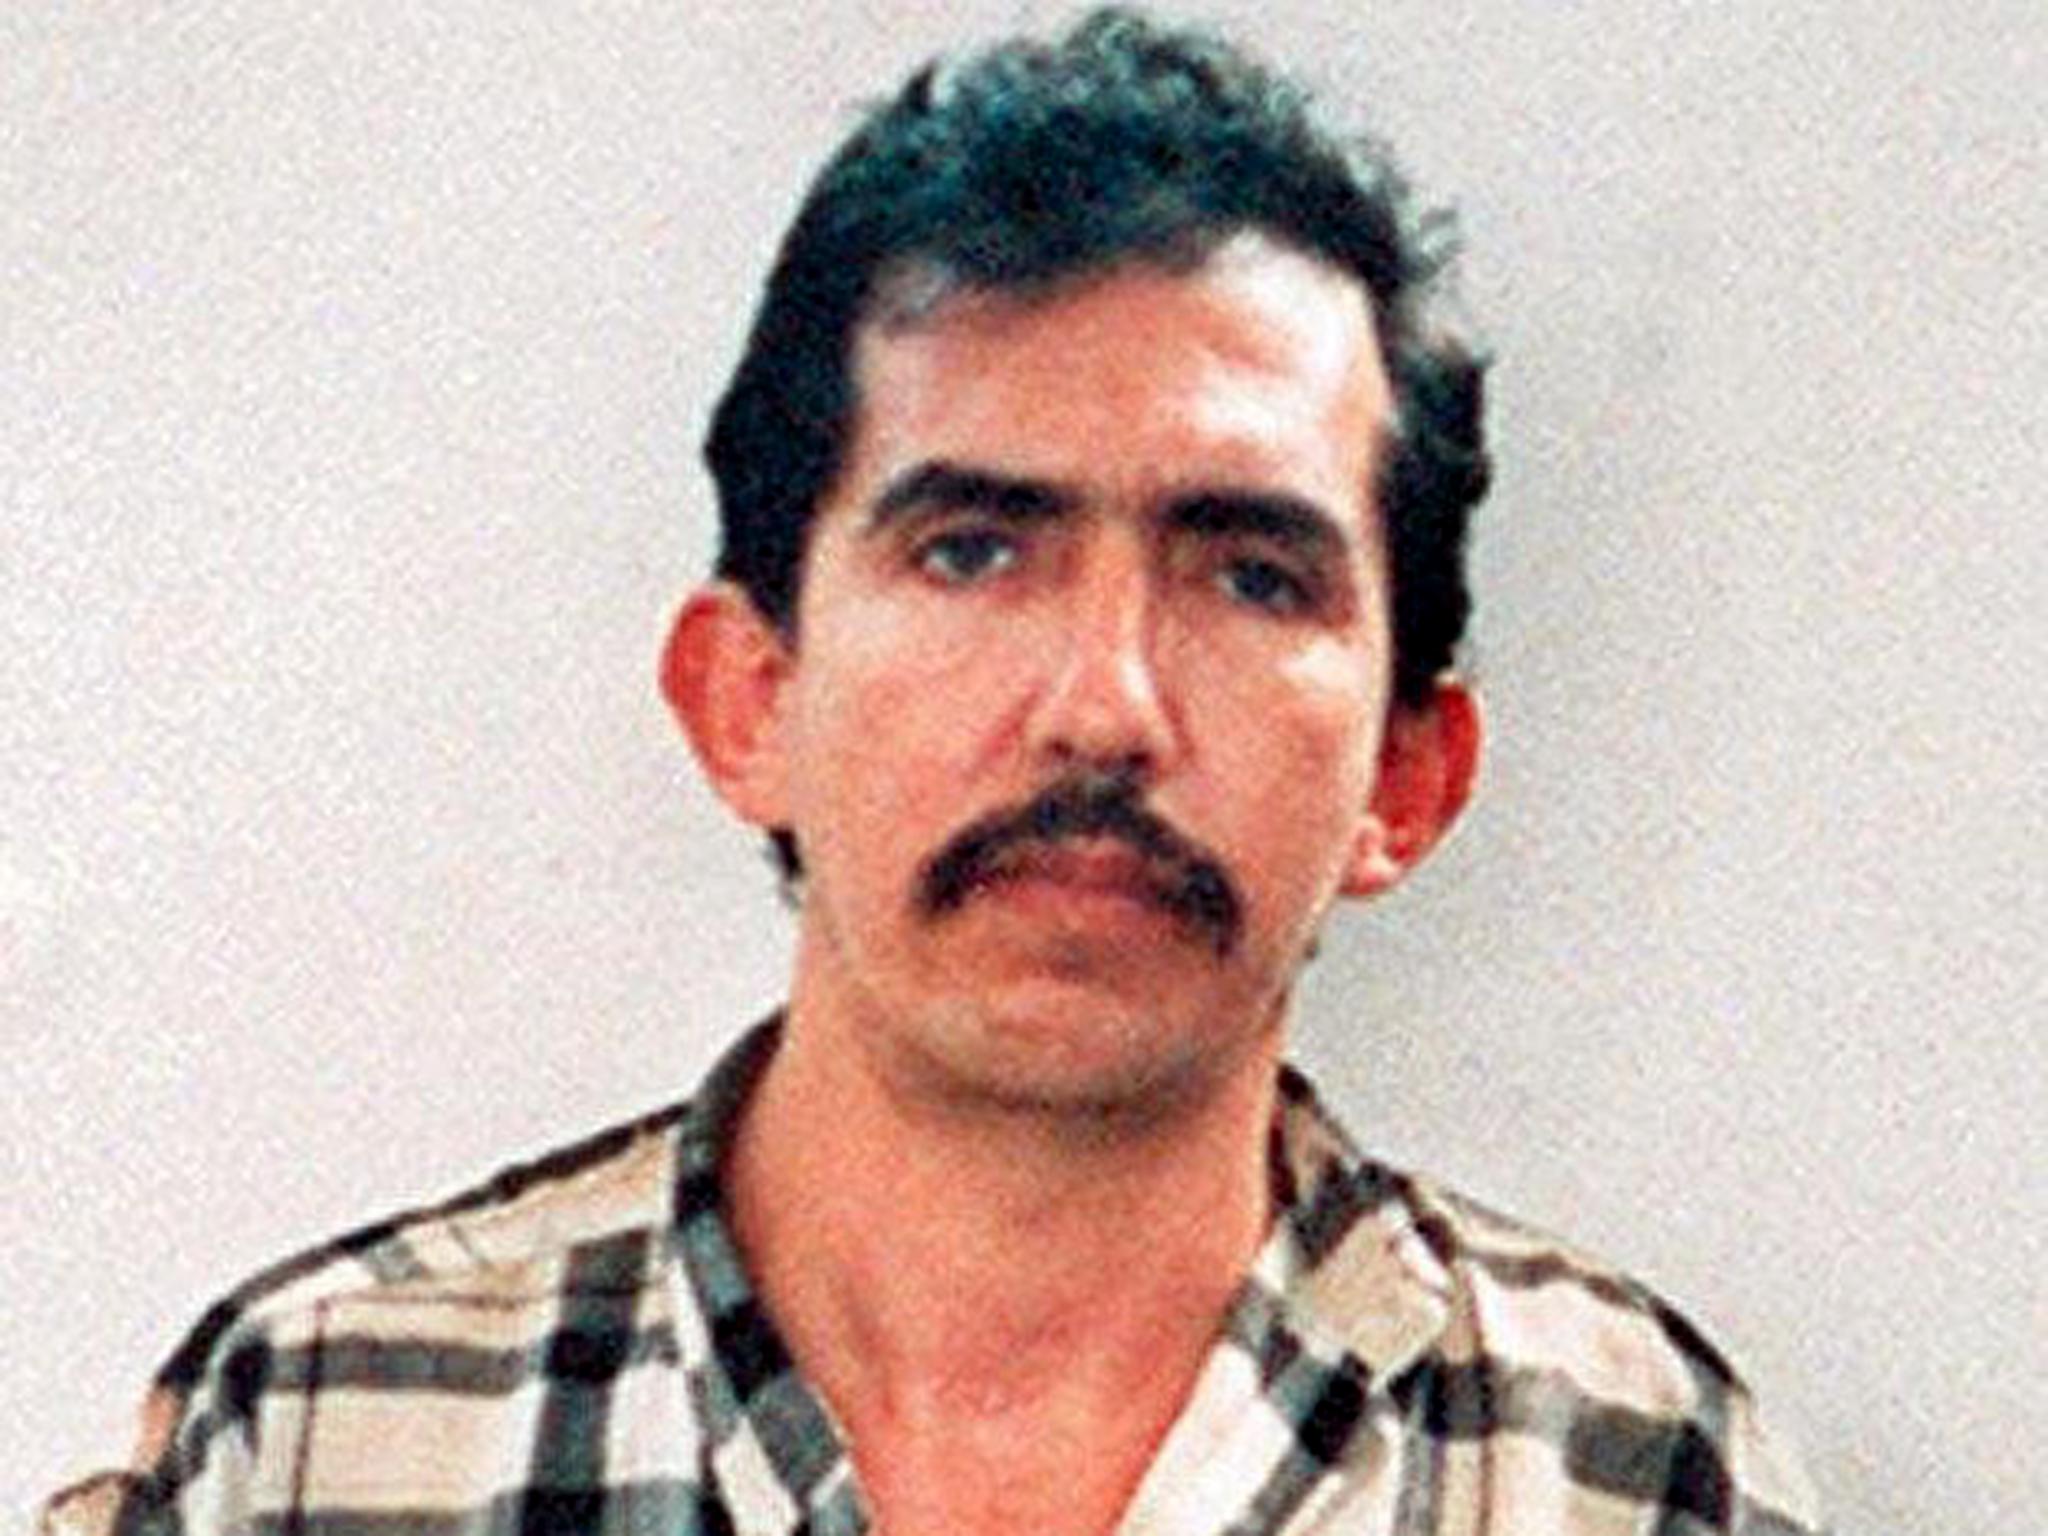 Colombian Luis Garavito has been called the world's worst known serial killer